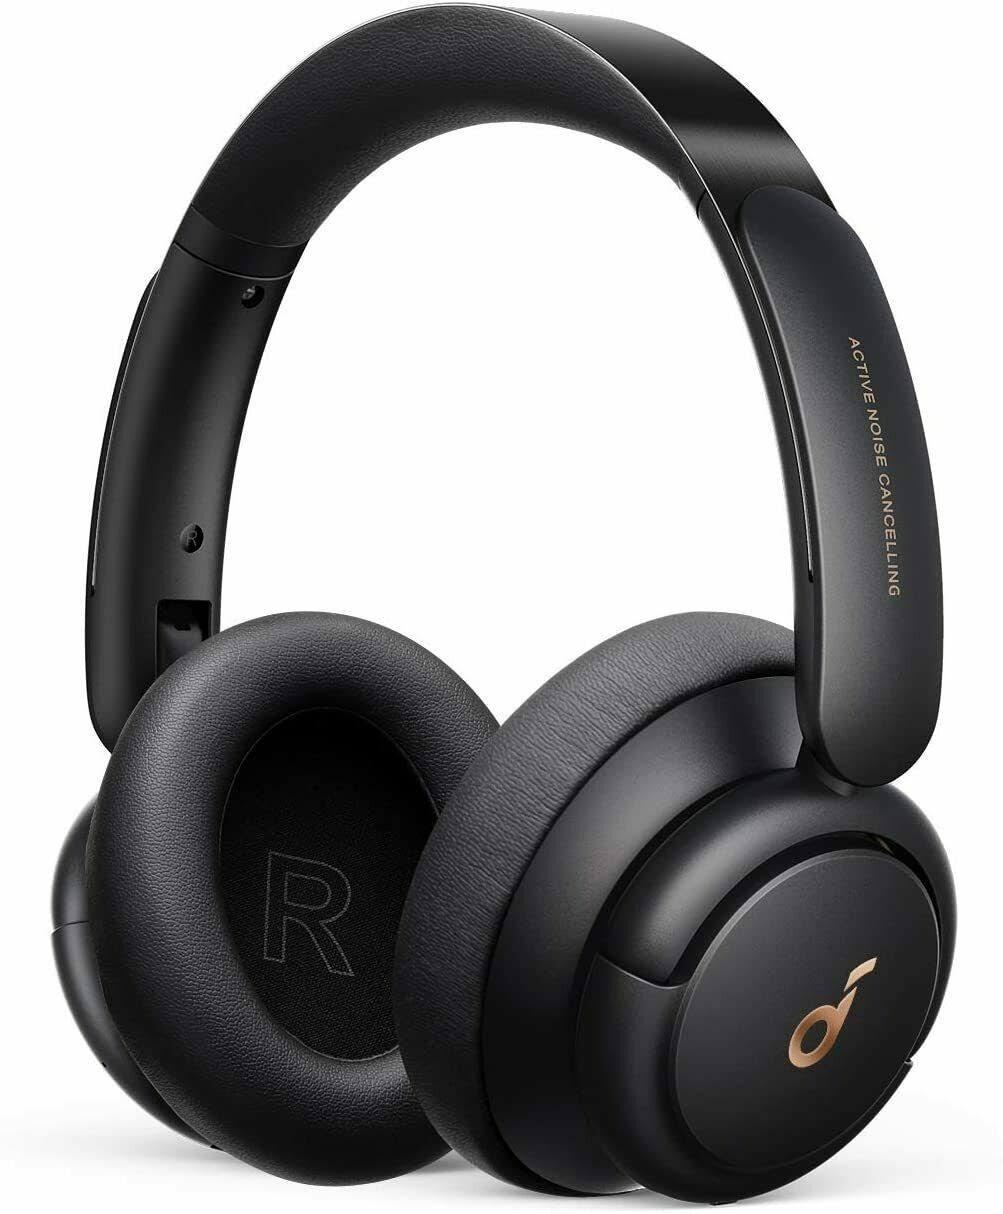 Monoprice keeps upping its game, offering amazing performance and value. The best-kept secret in audio land? Monolith Headphones fad74a58 mmw789dq73